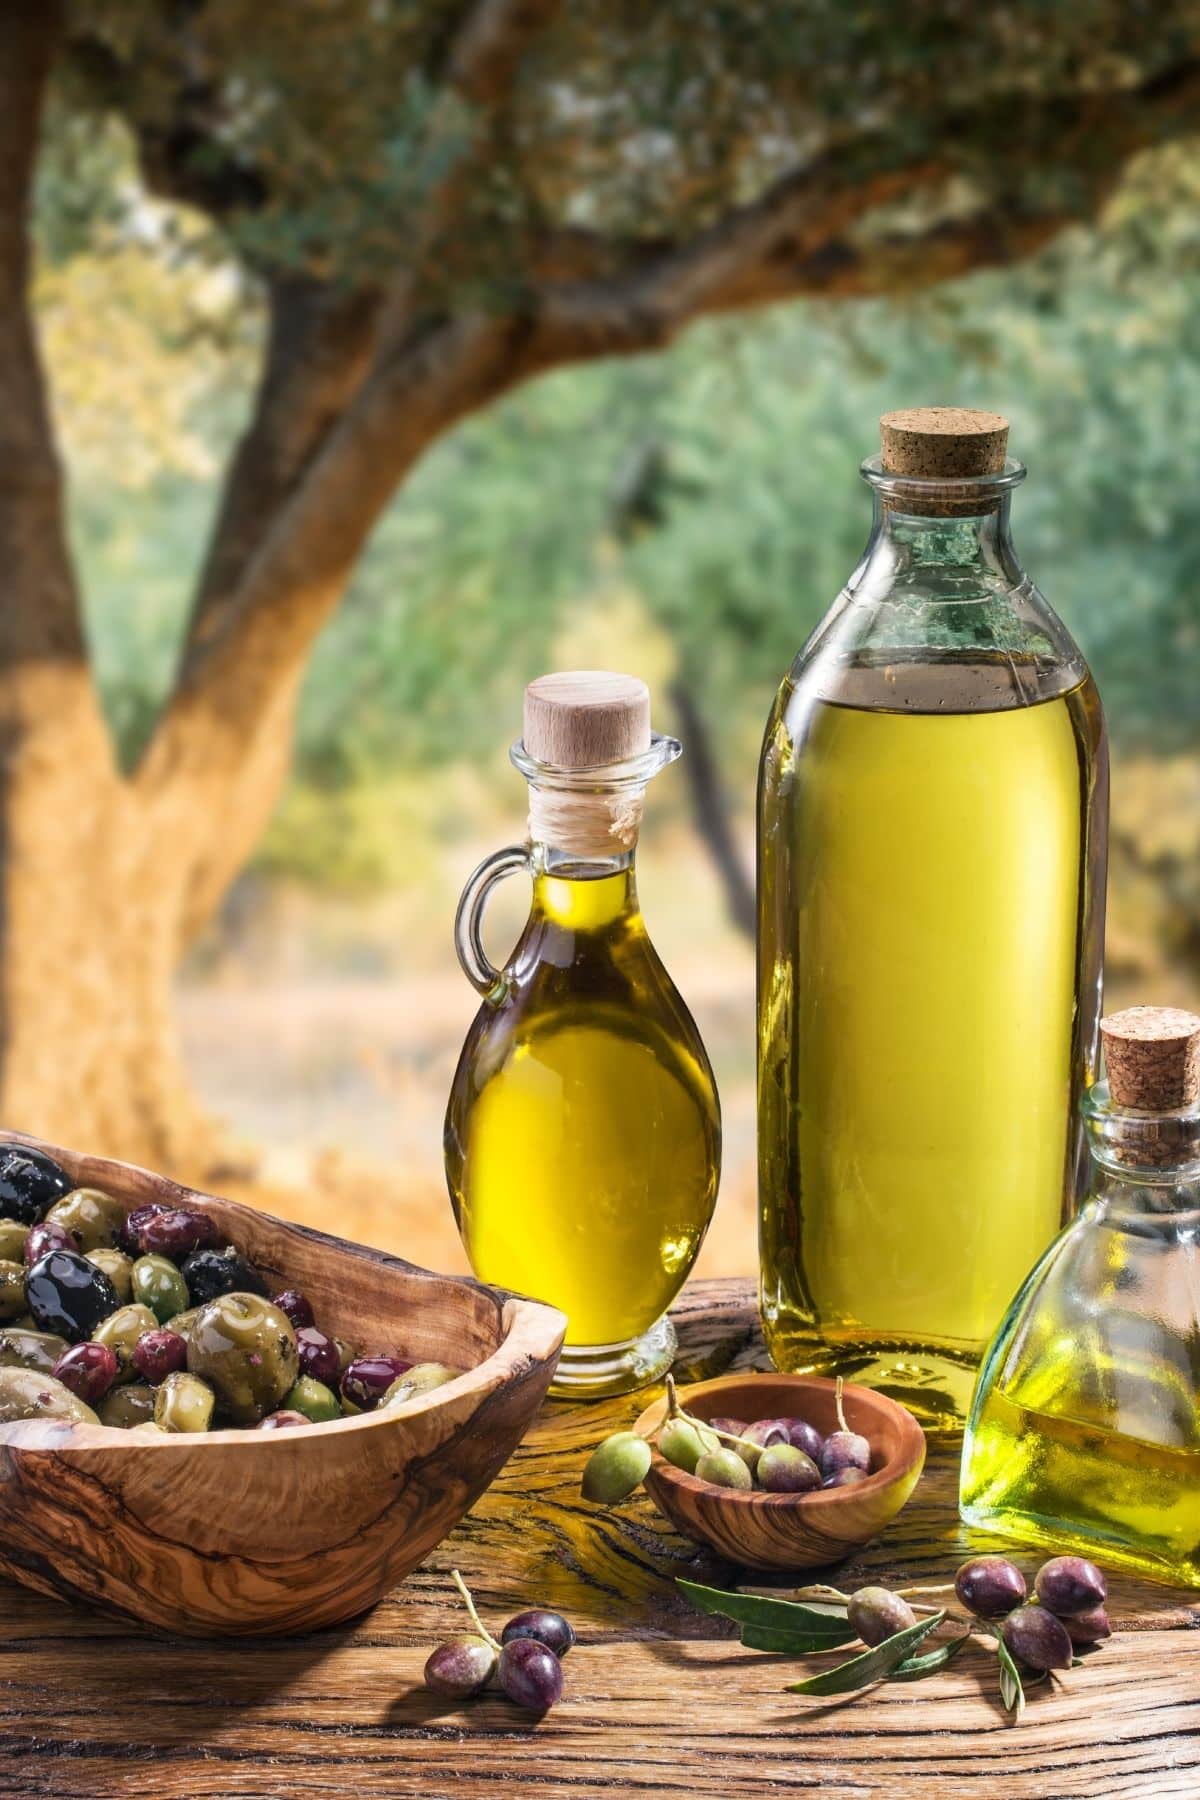 jars of olive oil on a picnic table with fresh olives